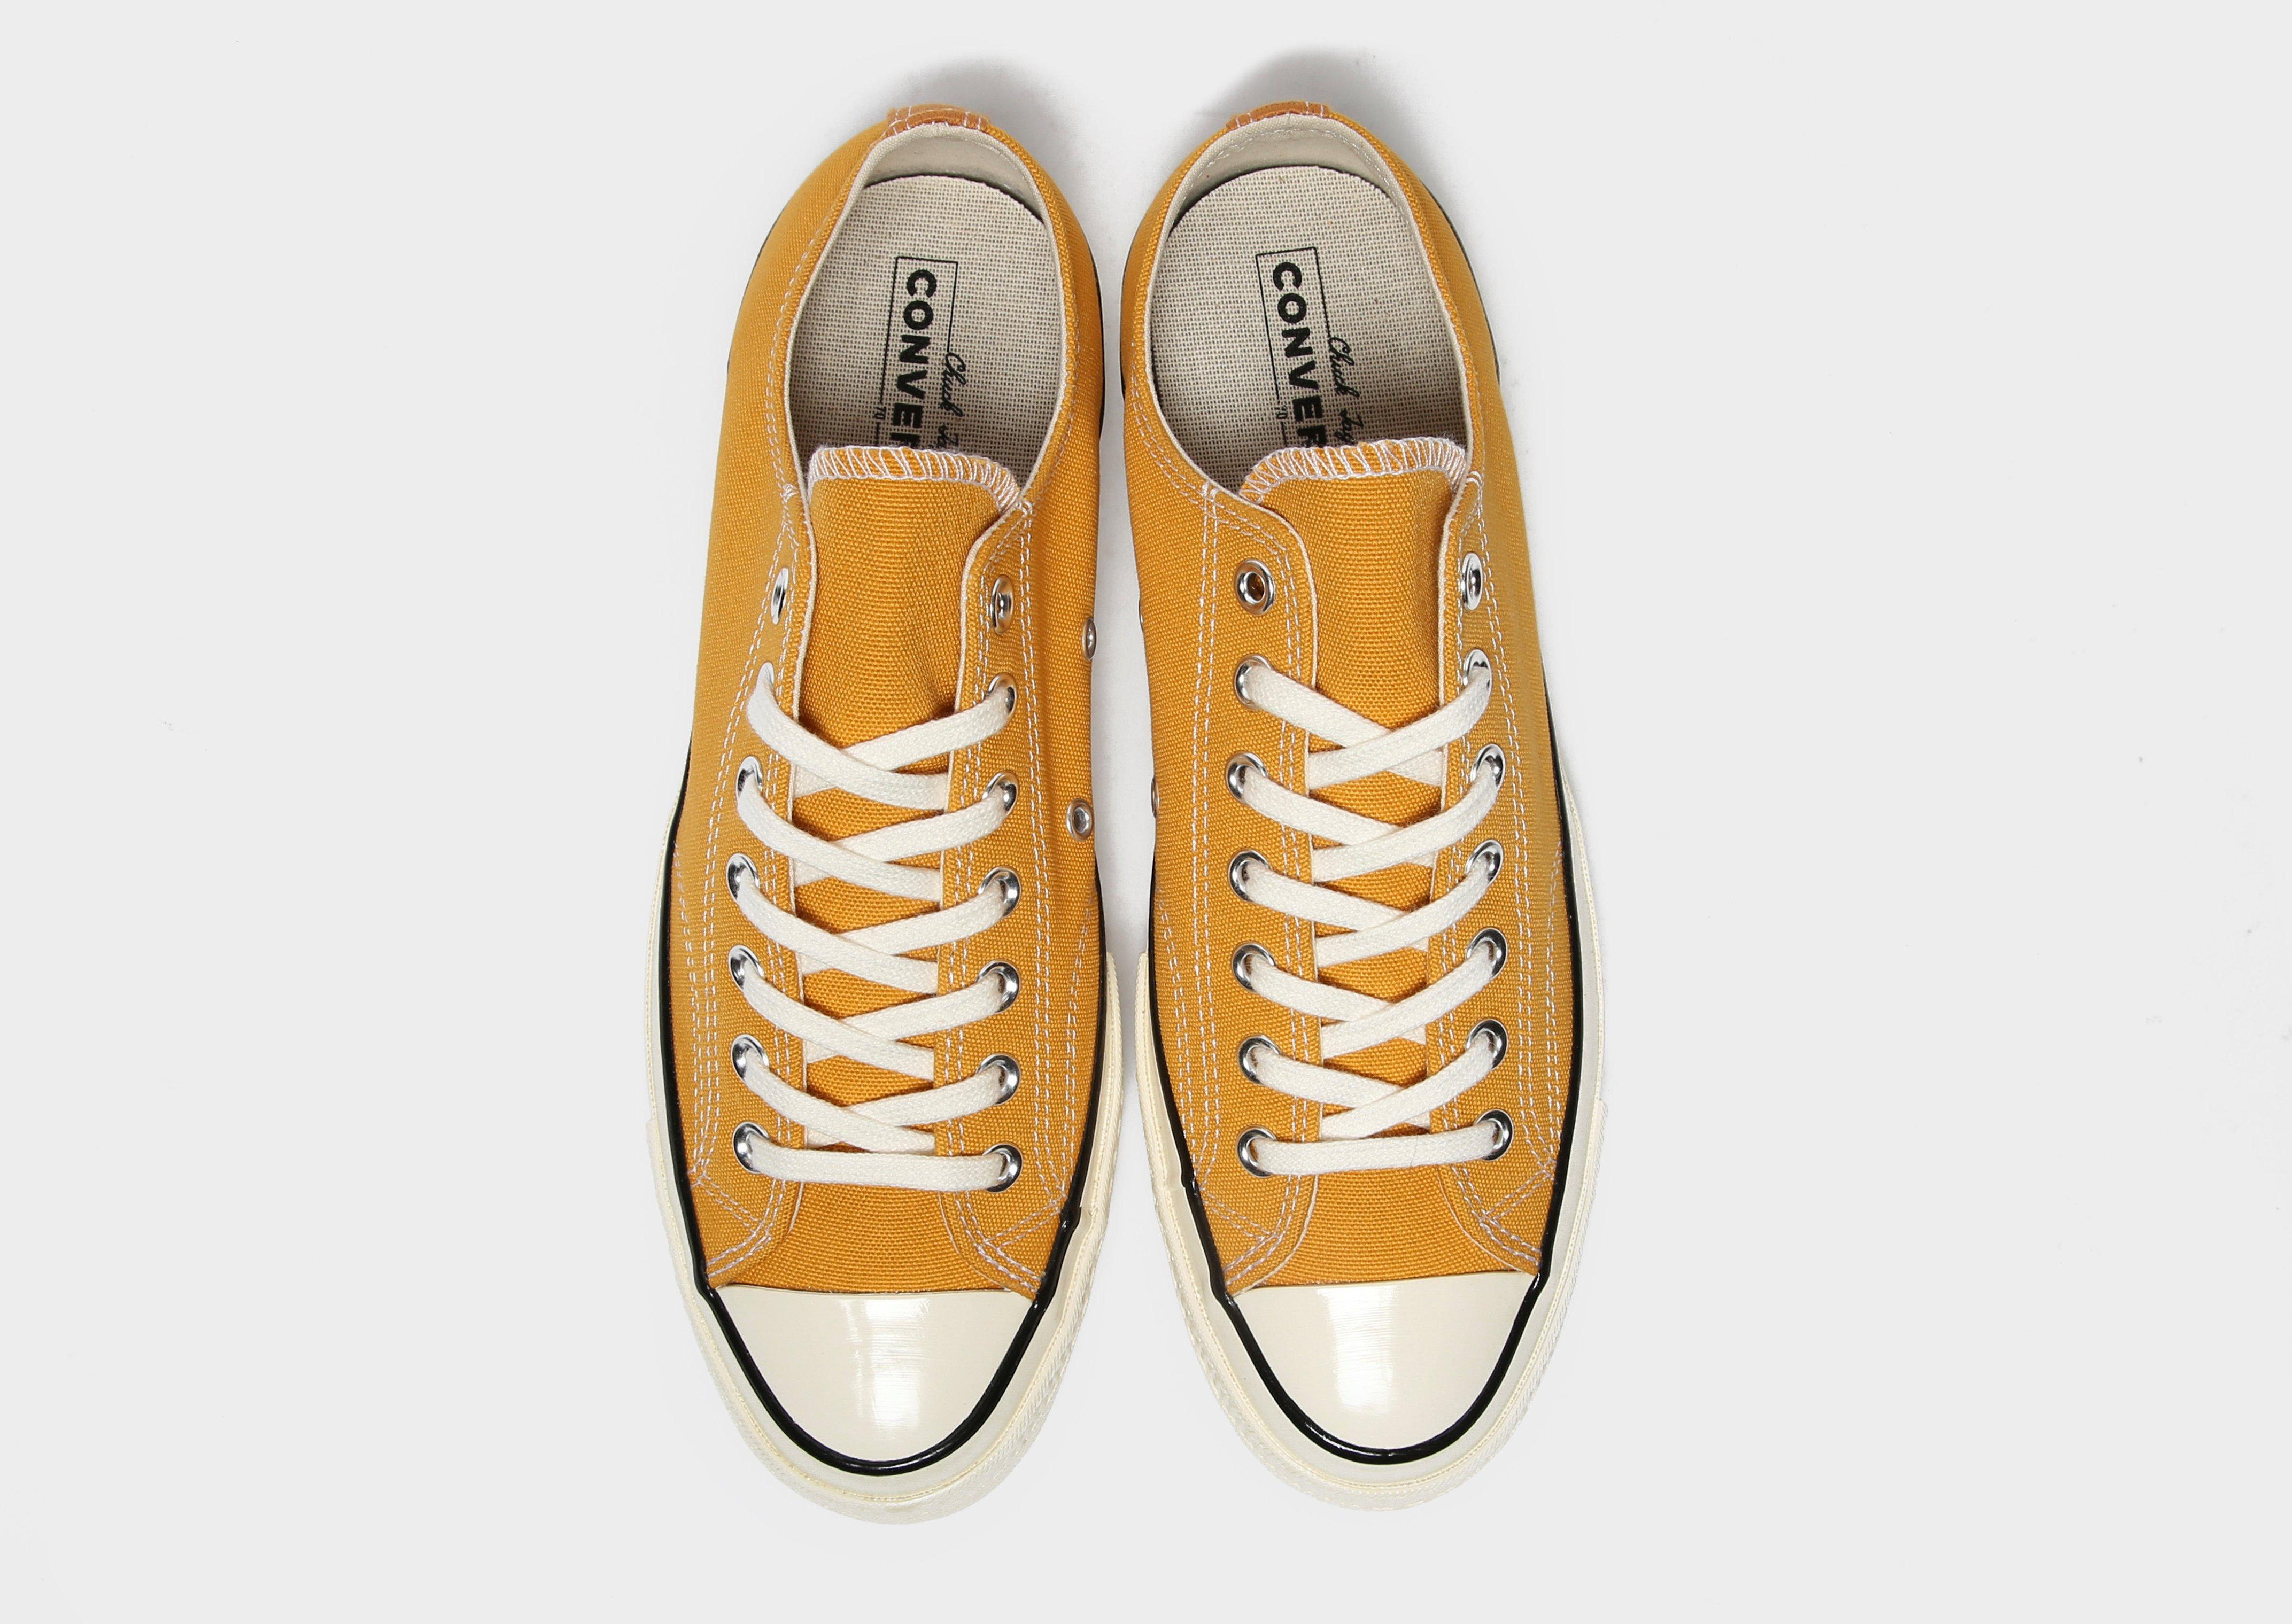 converse chuck taylor all star 70's ox low